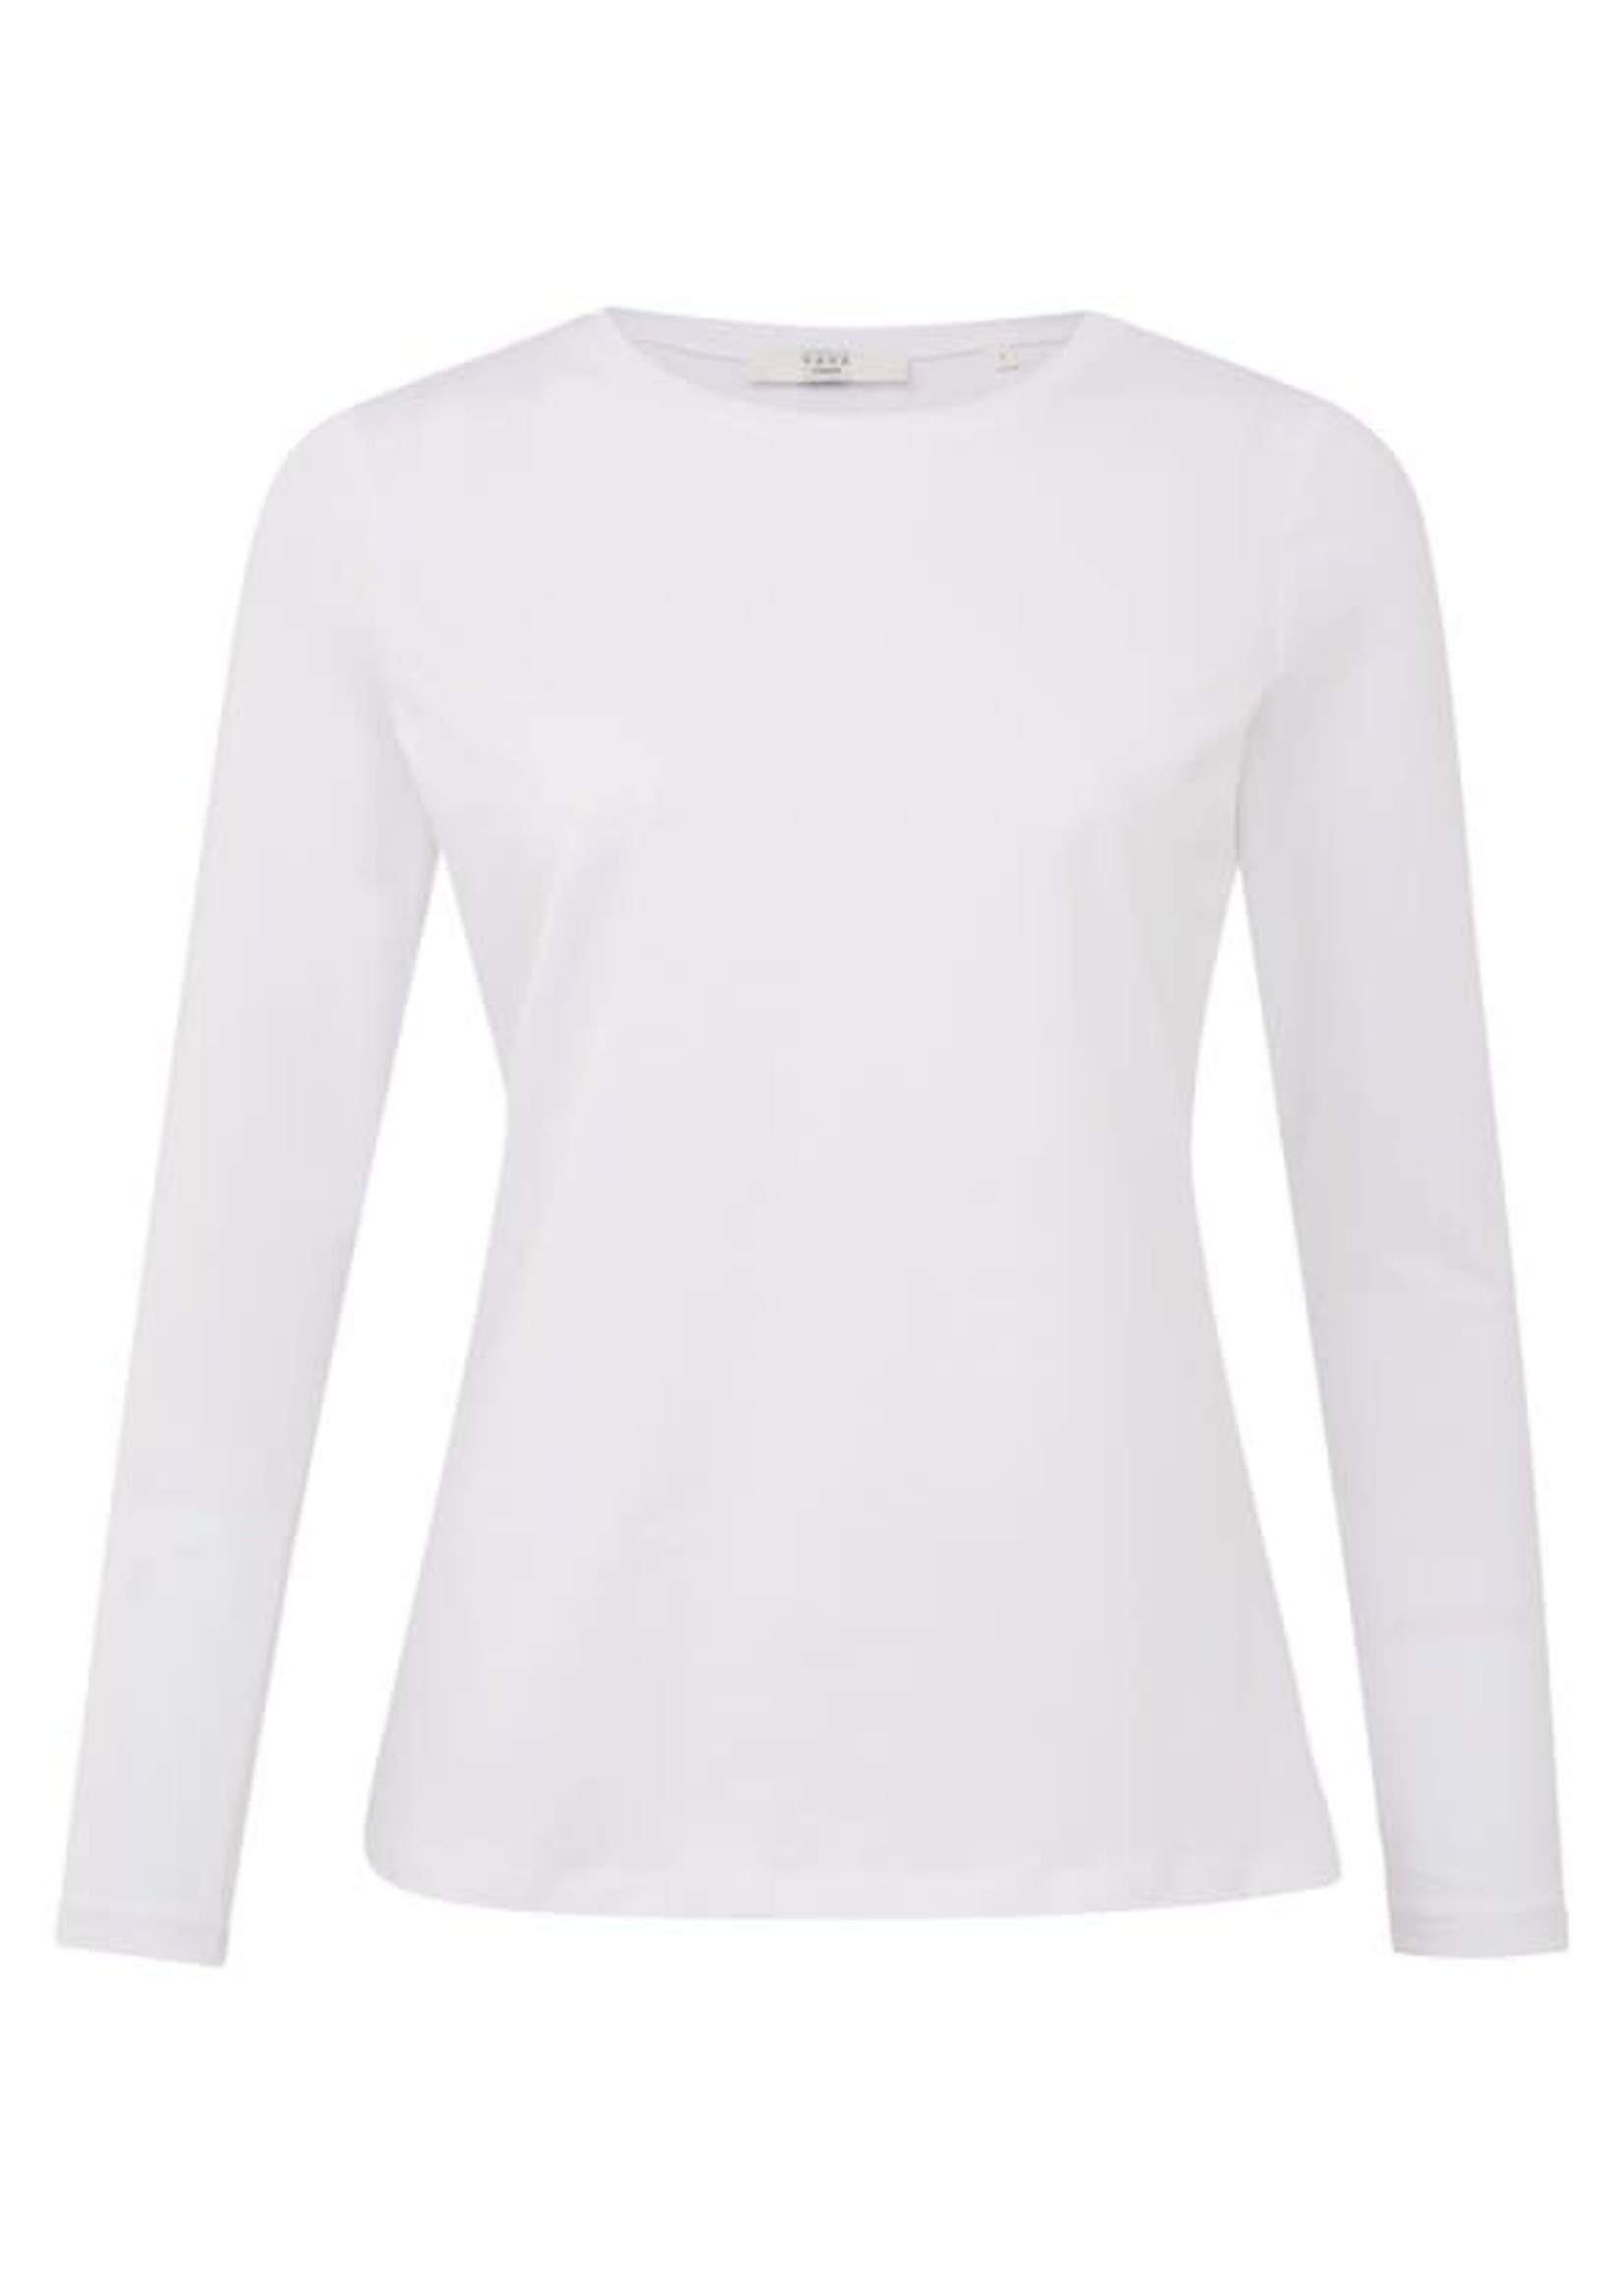 Yaya Yaya, T-shirt with round neck and long sleeves in a regular fit, Pure white